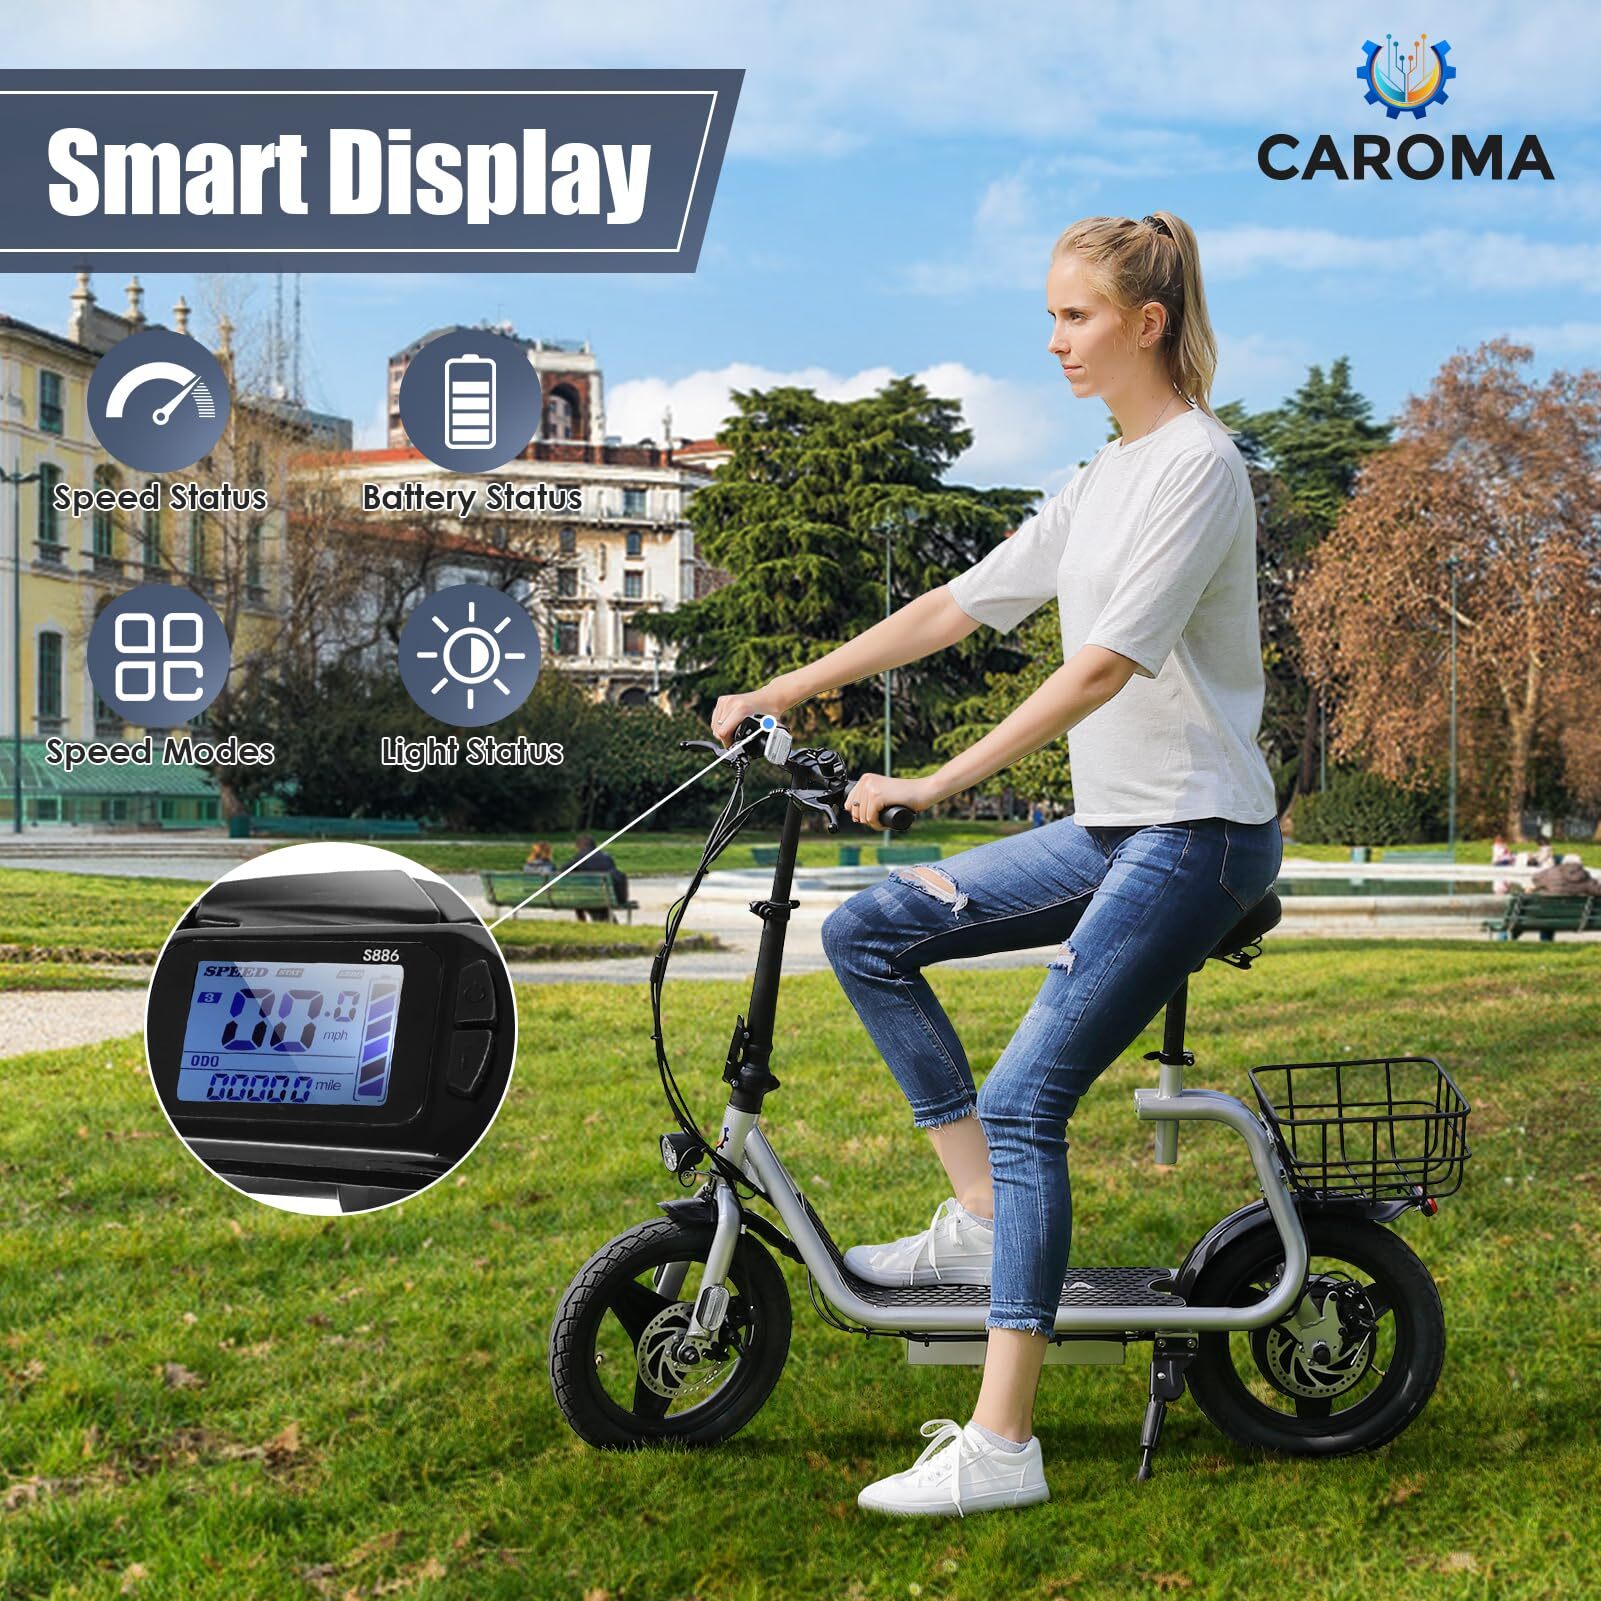 Caroma 800W(Peak) Adults Electric Scooter with Removable Seat, Max Speed 20mph Up to 25 Miles Range, 14" Tire for Commuting Scooter with Basket, Folding Electric Scooter, Silver - image 3 of 9